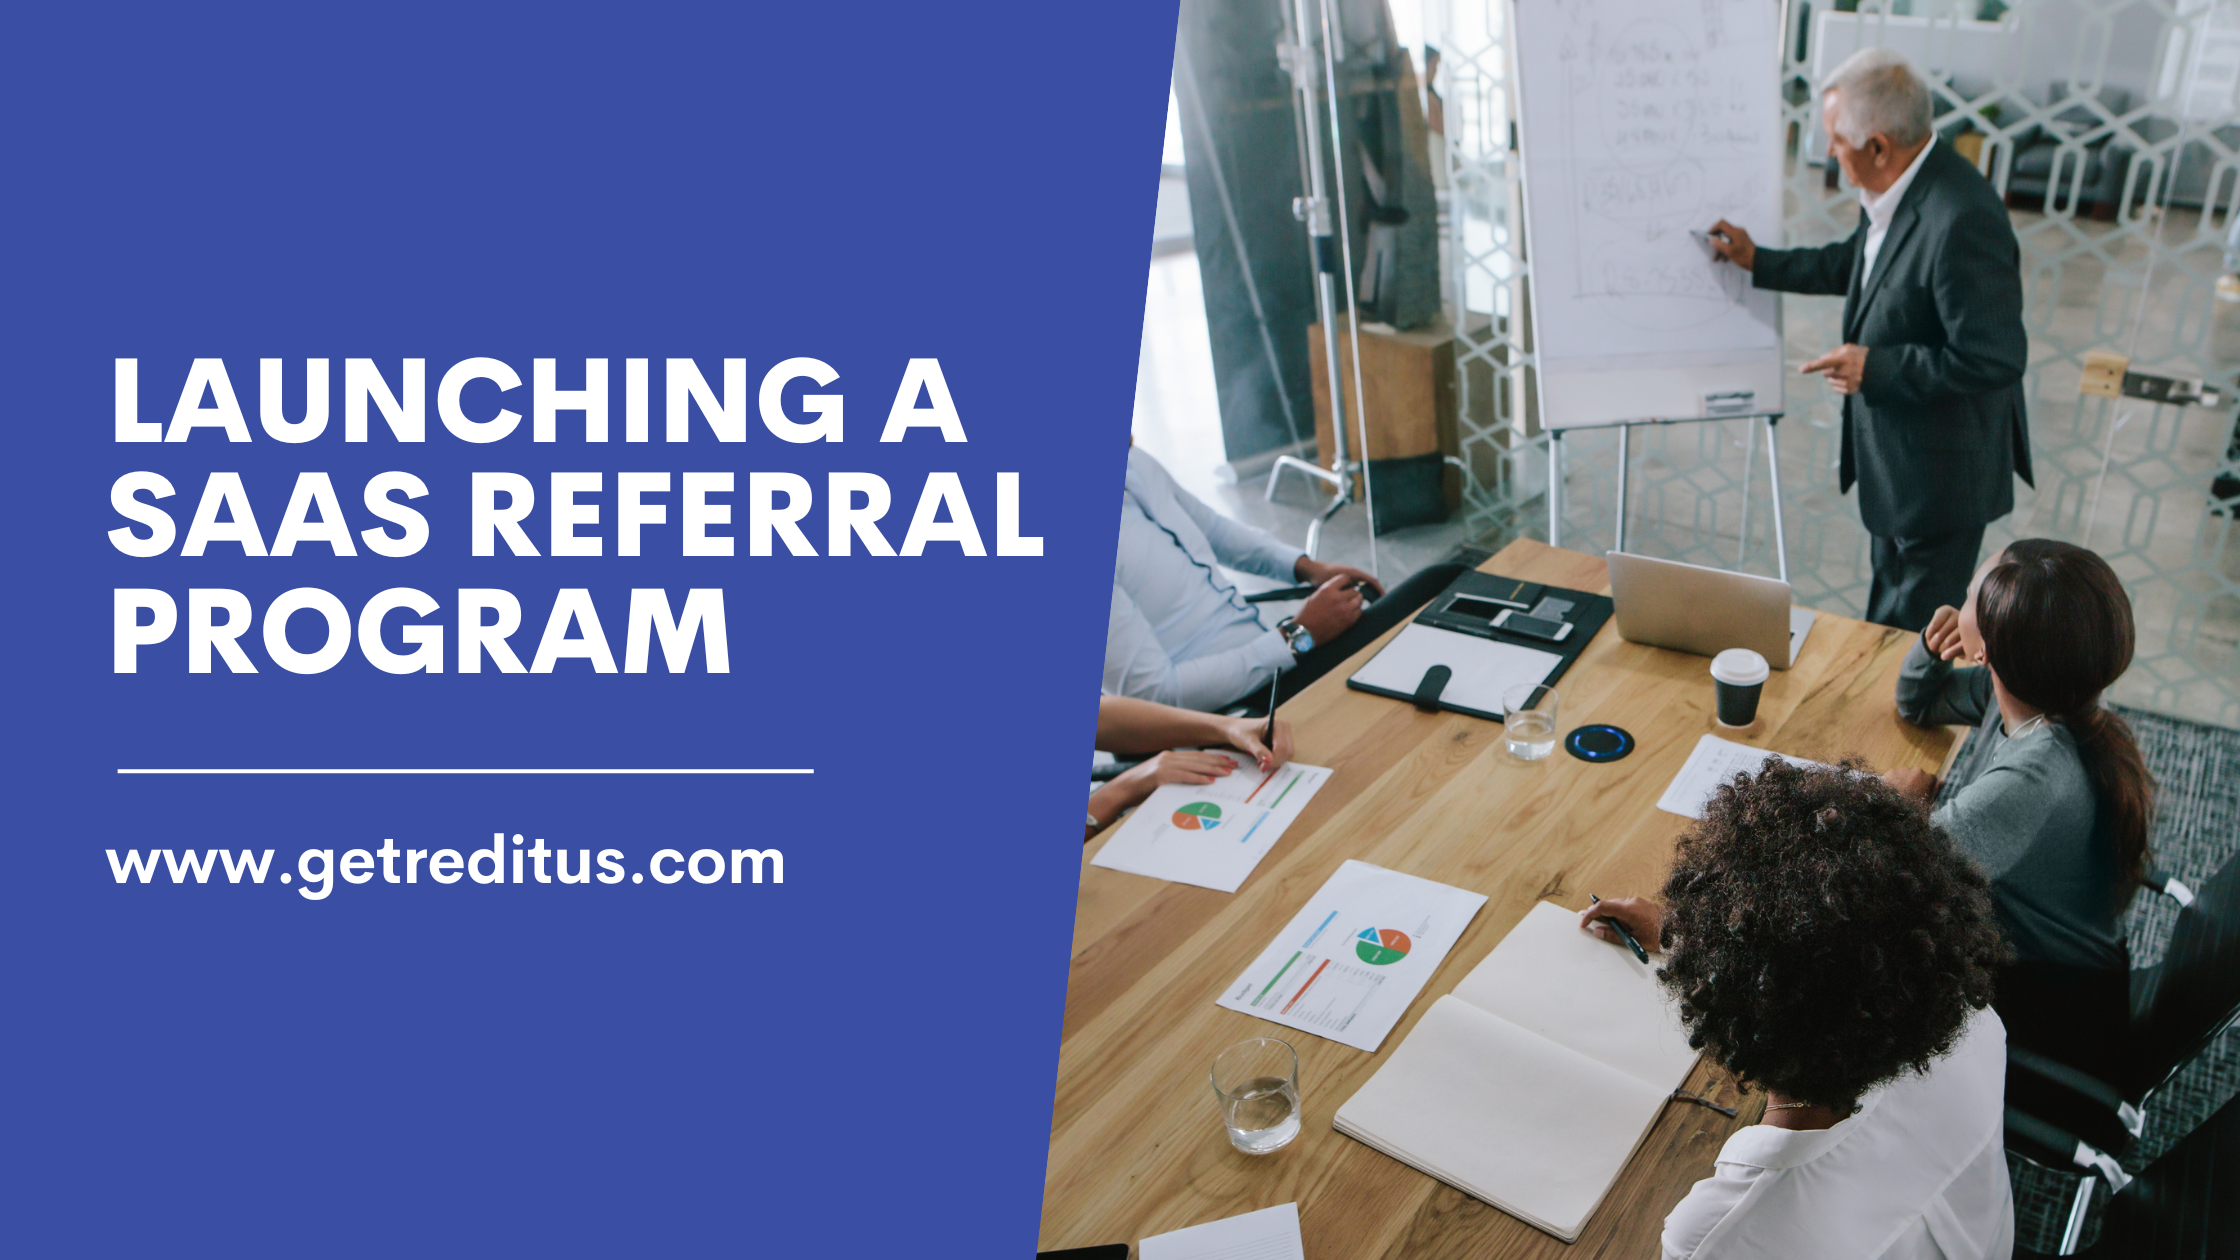 https://www.getreditus.com/blog/how-to-launch-and-manage-a-saas-referral-program/